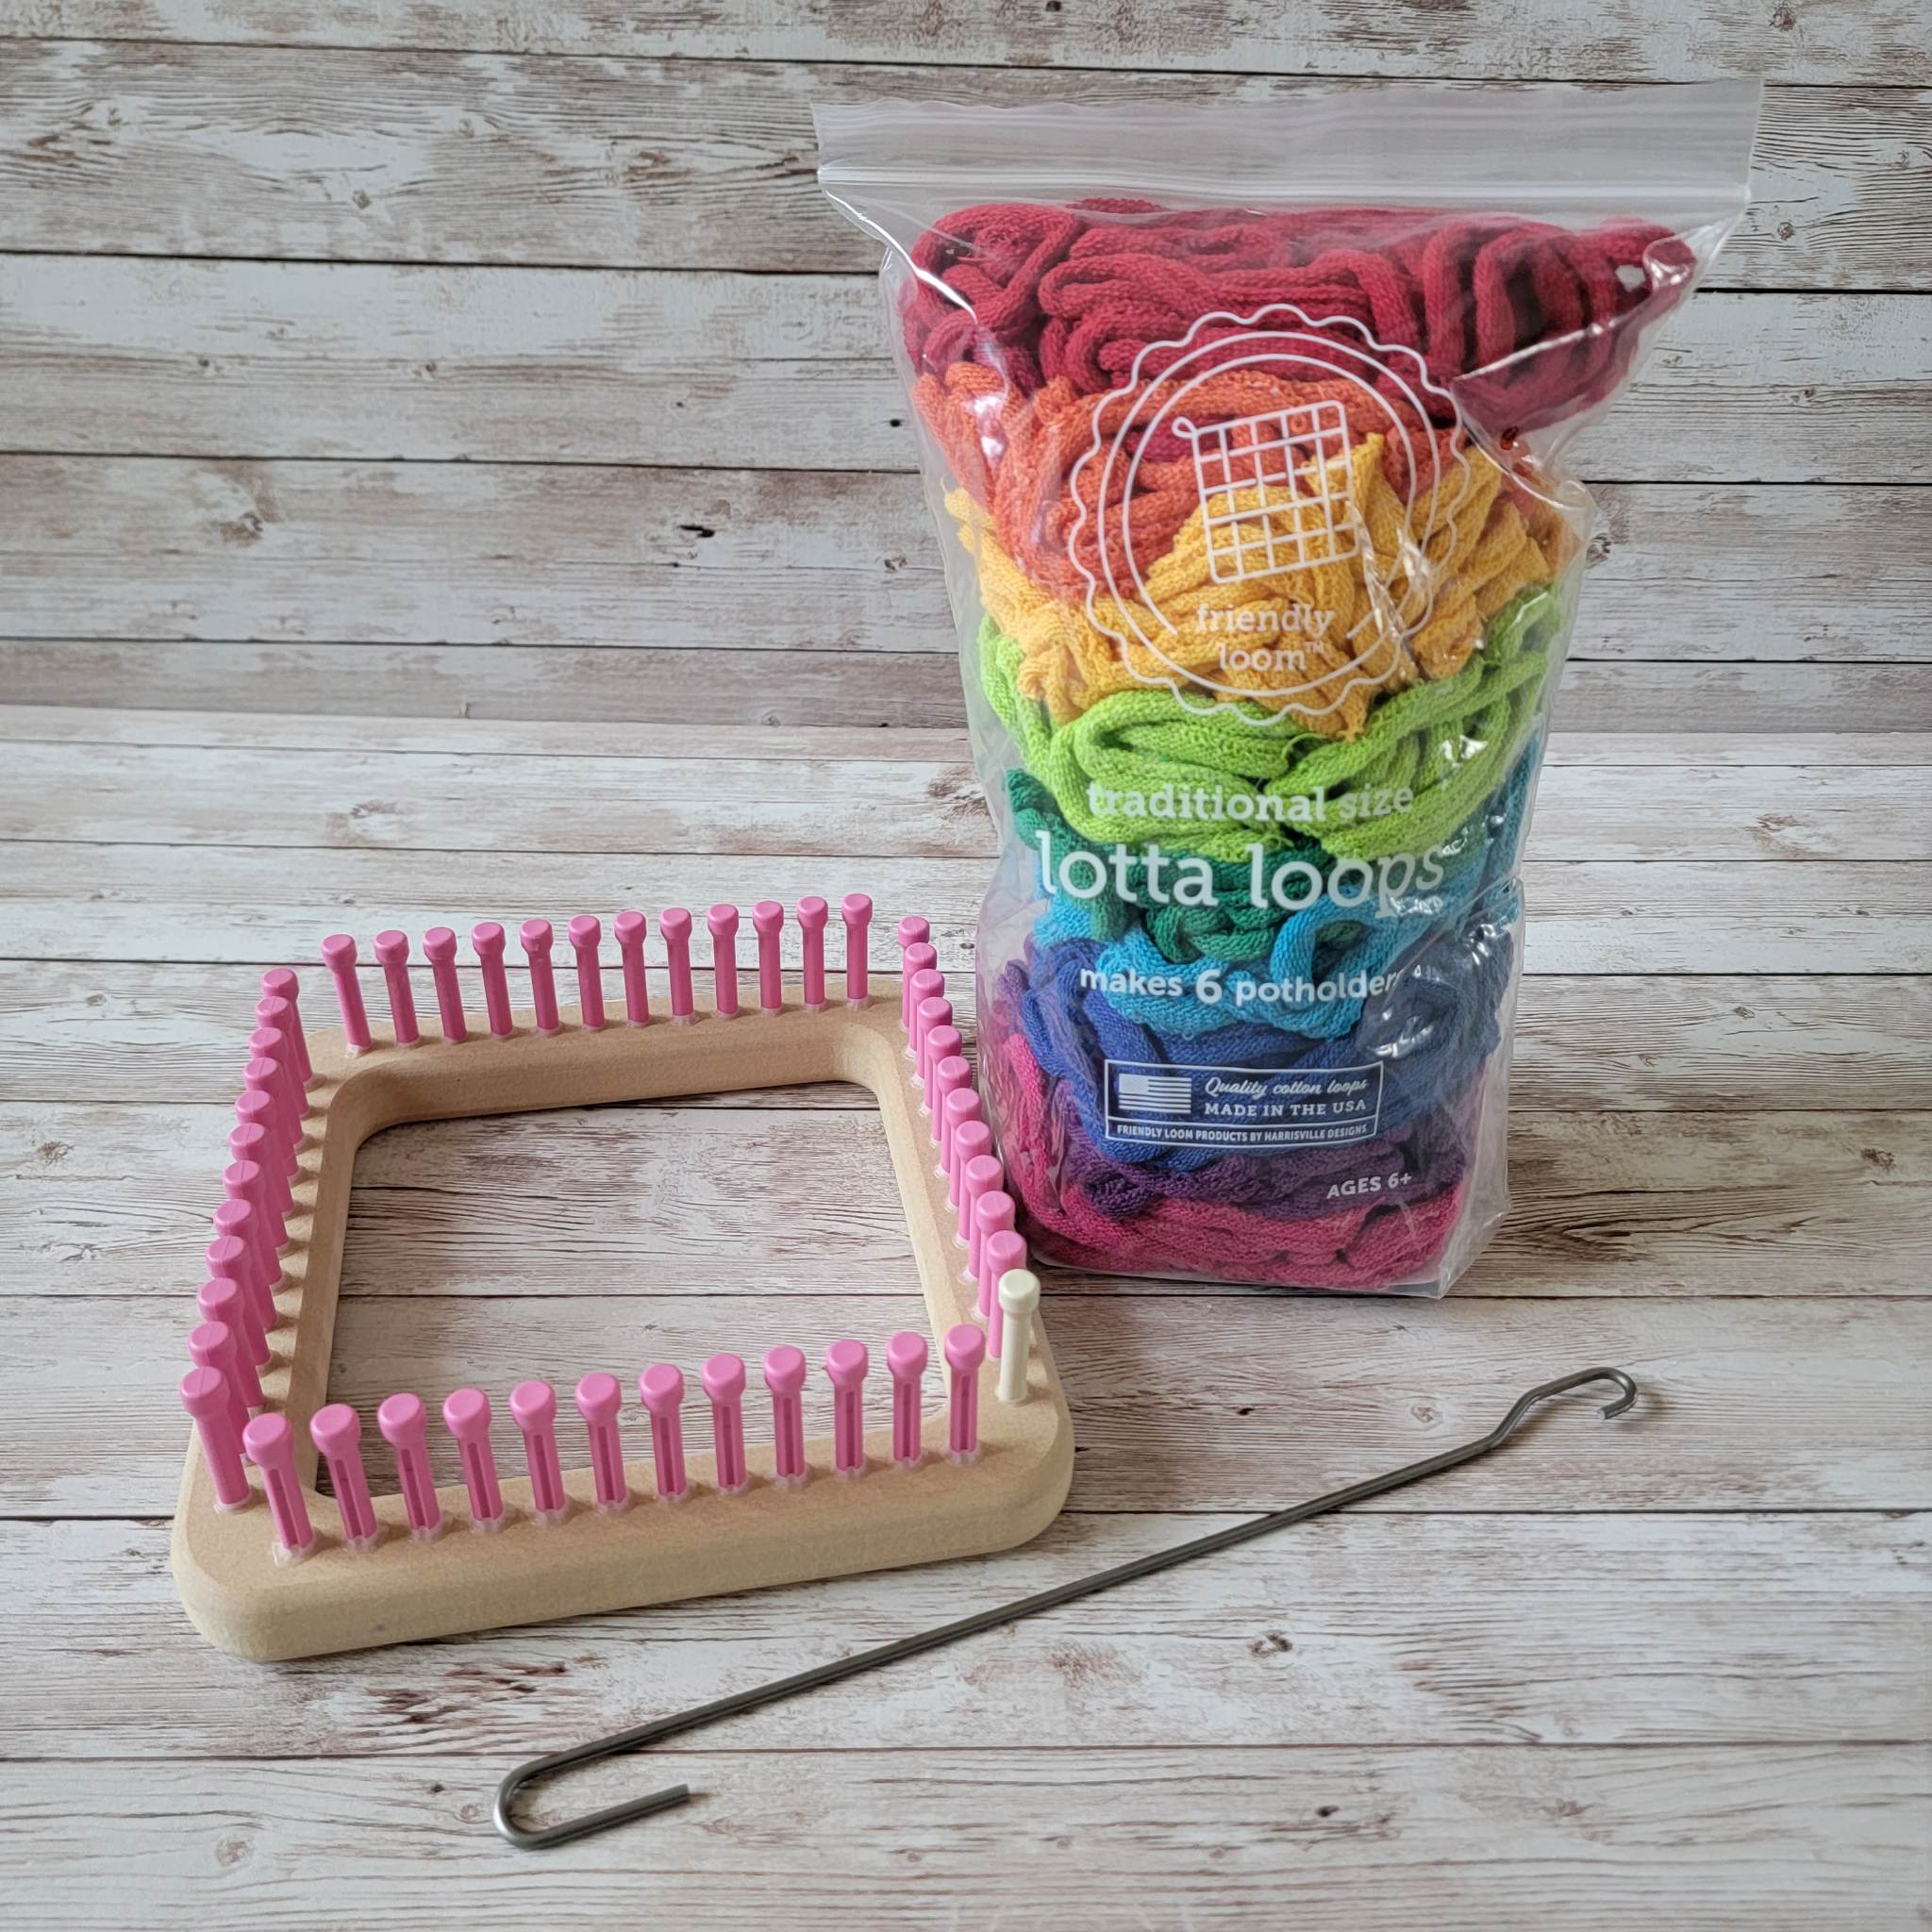 Friendly Loom Lotta Loops Rainbow 7 Traditional Size Cotton Loops Makes 6  (6 x 6') Potholders by Harrisville Designs Made in The USA